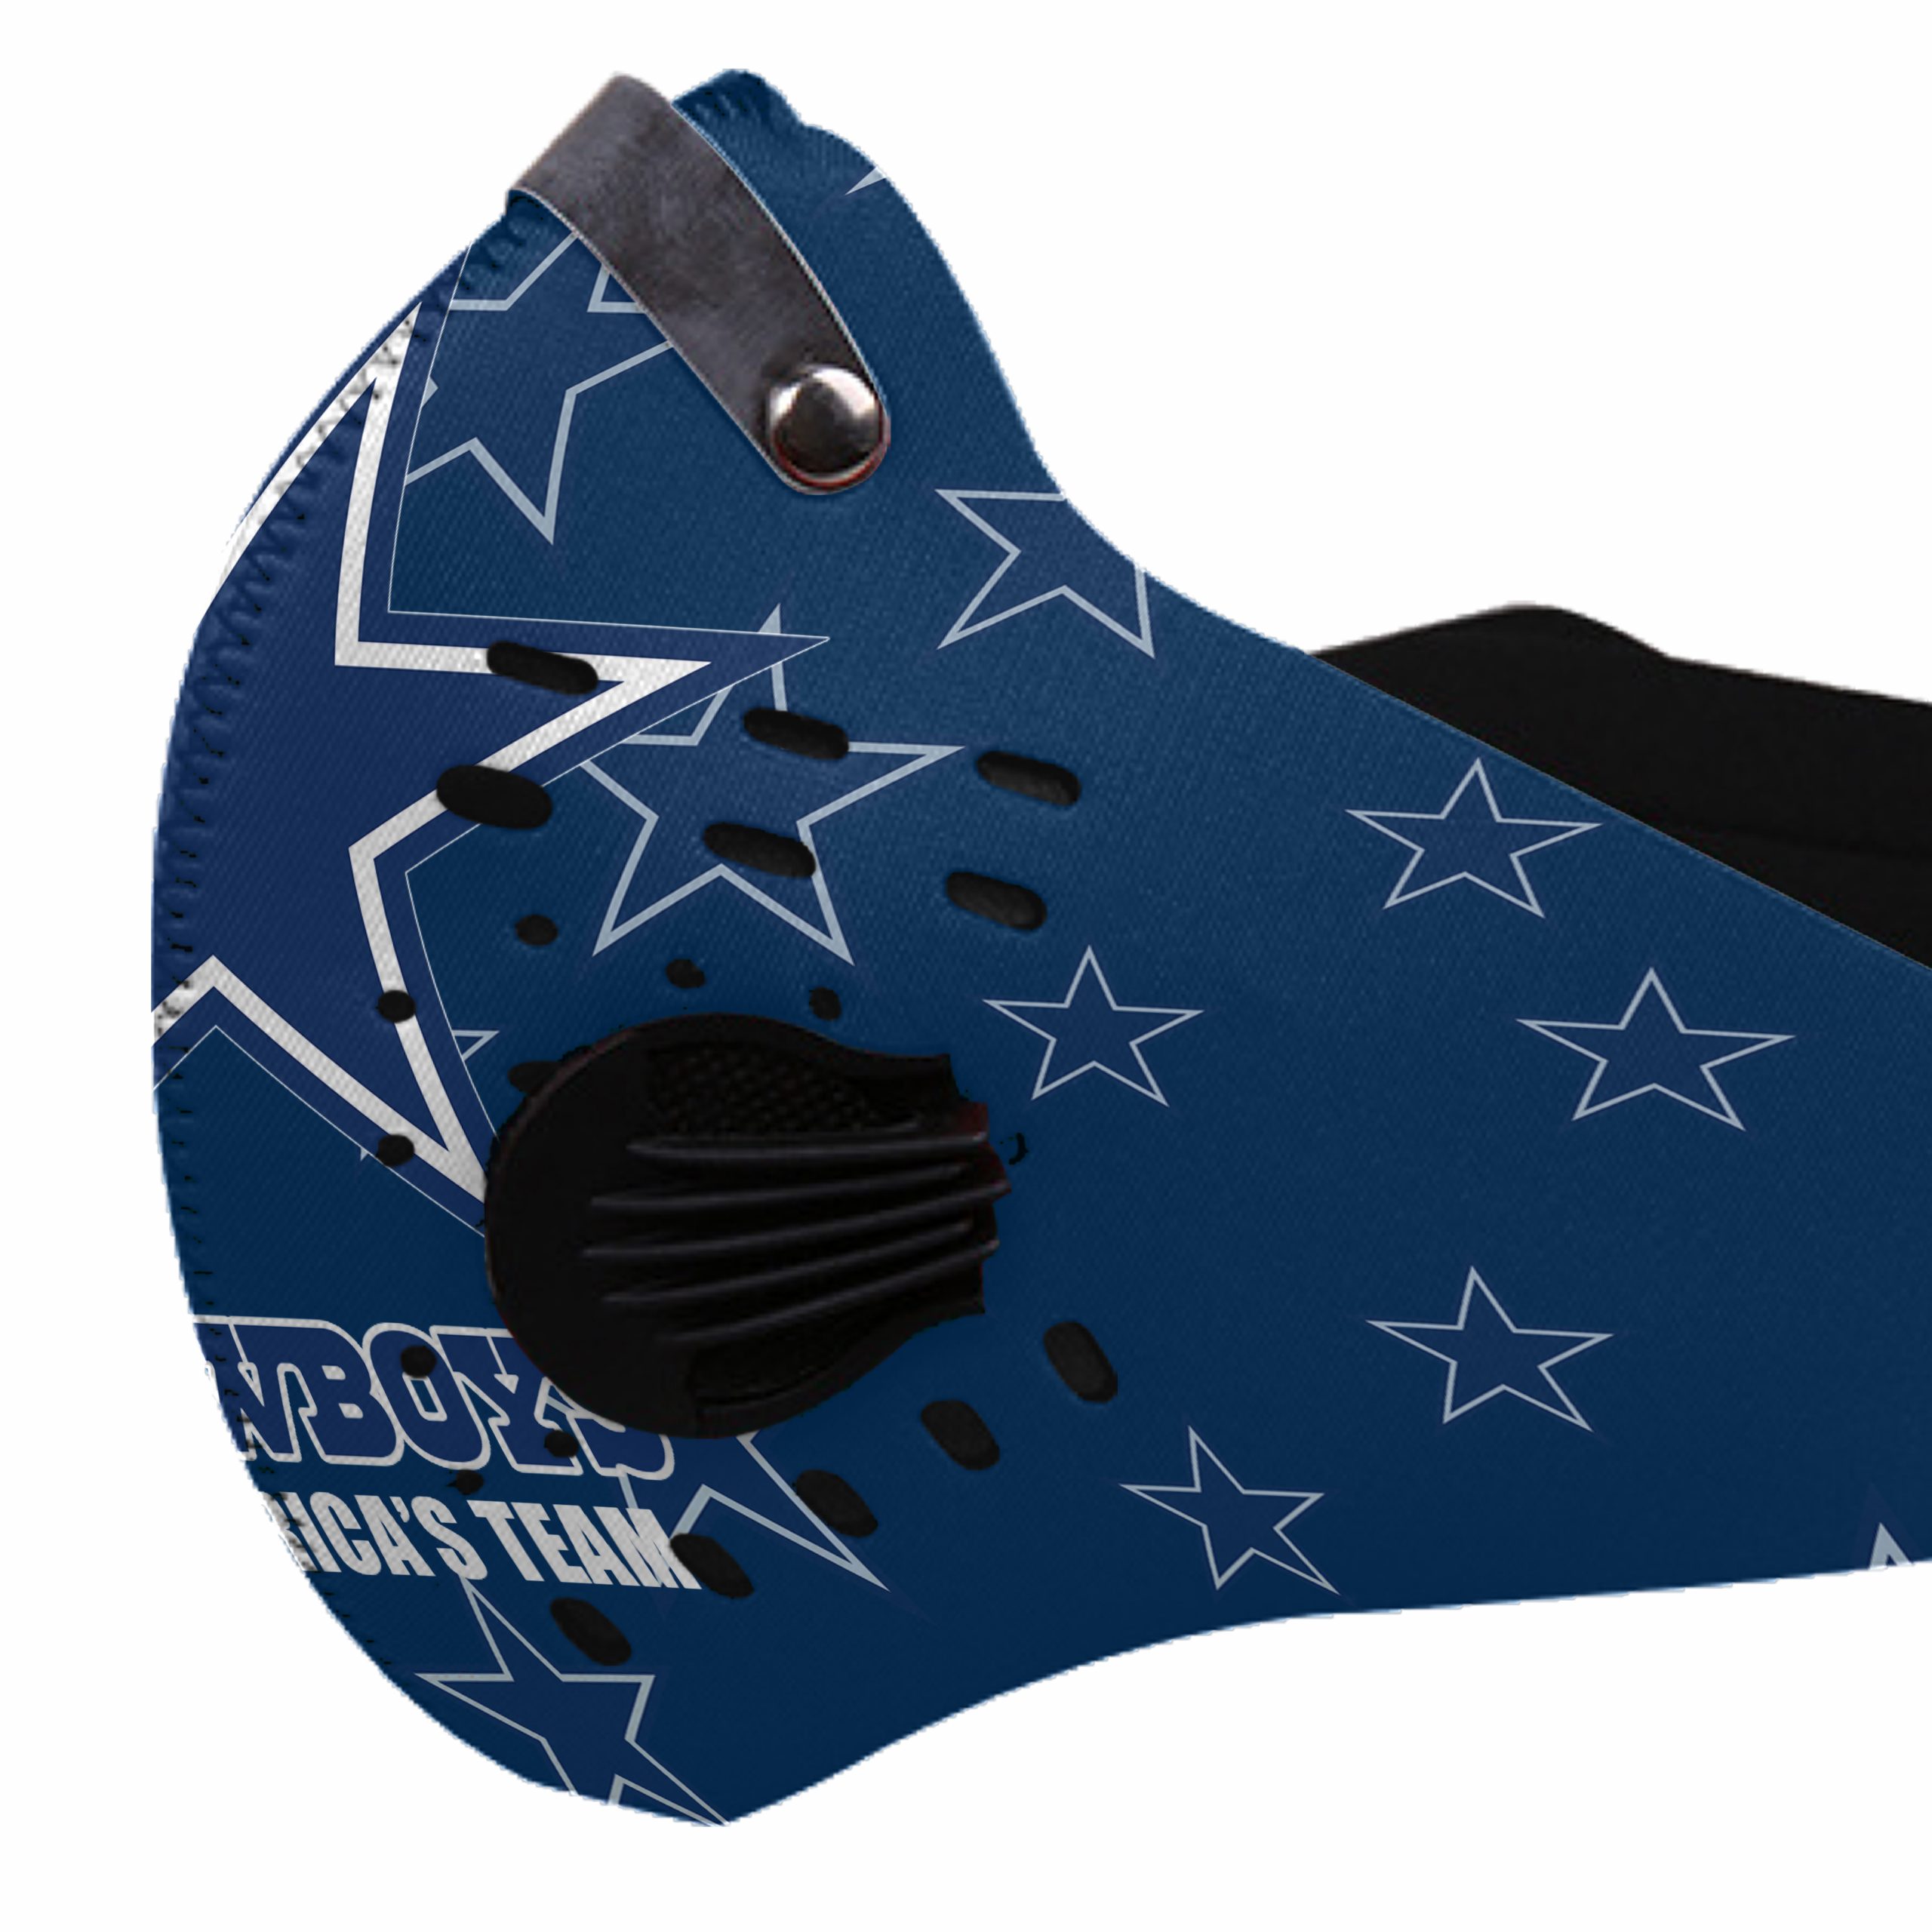 Cowboys america's team filter face mask - Pic 1